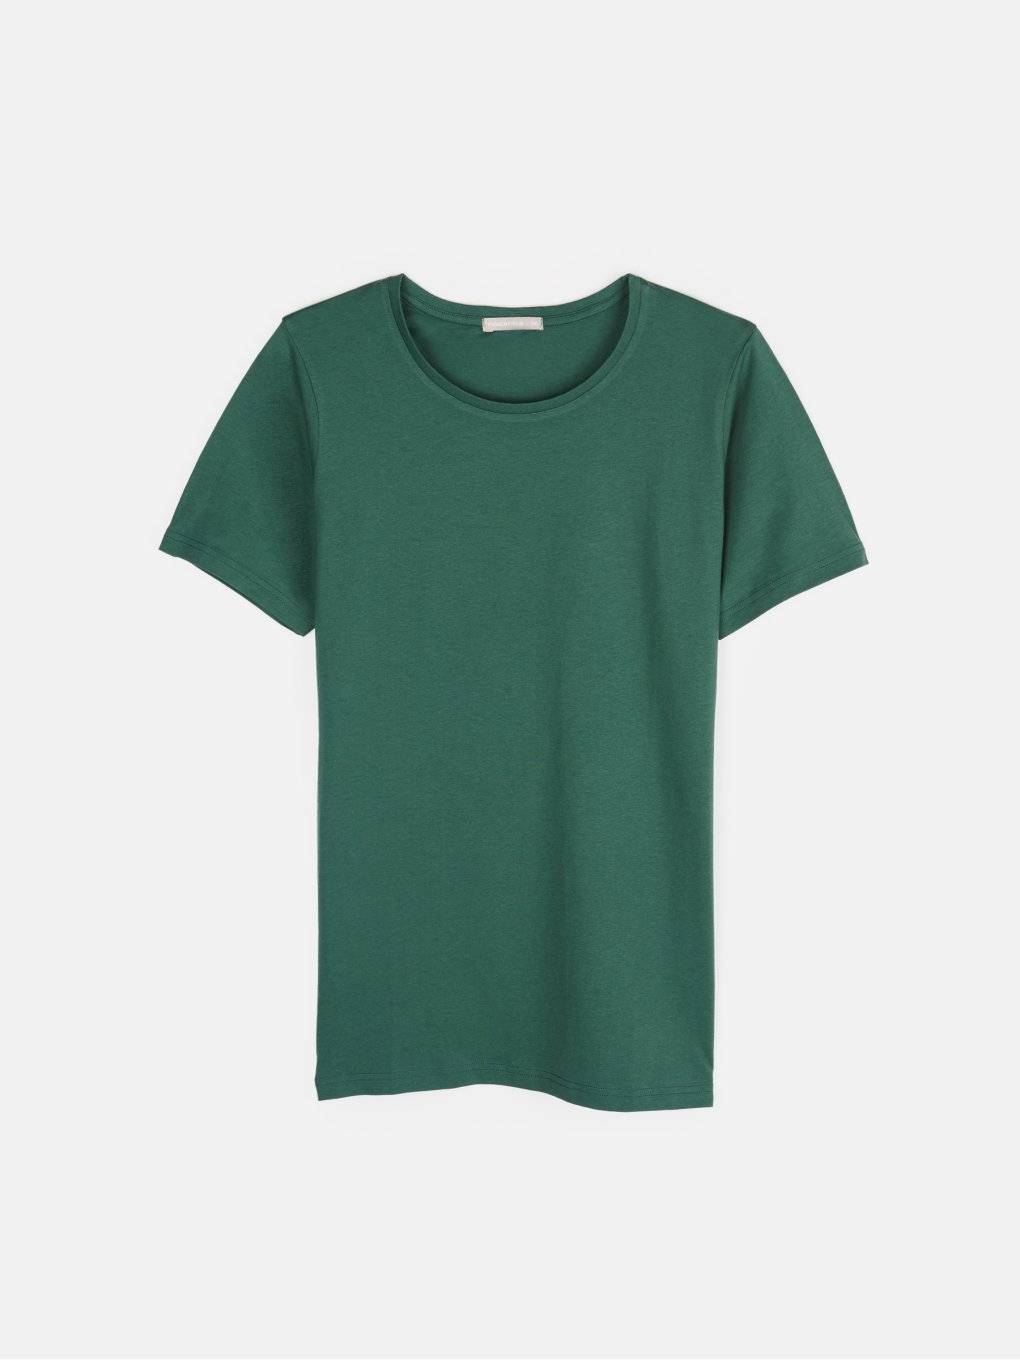 Cotton t-shirt with side slits